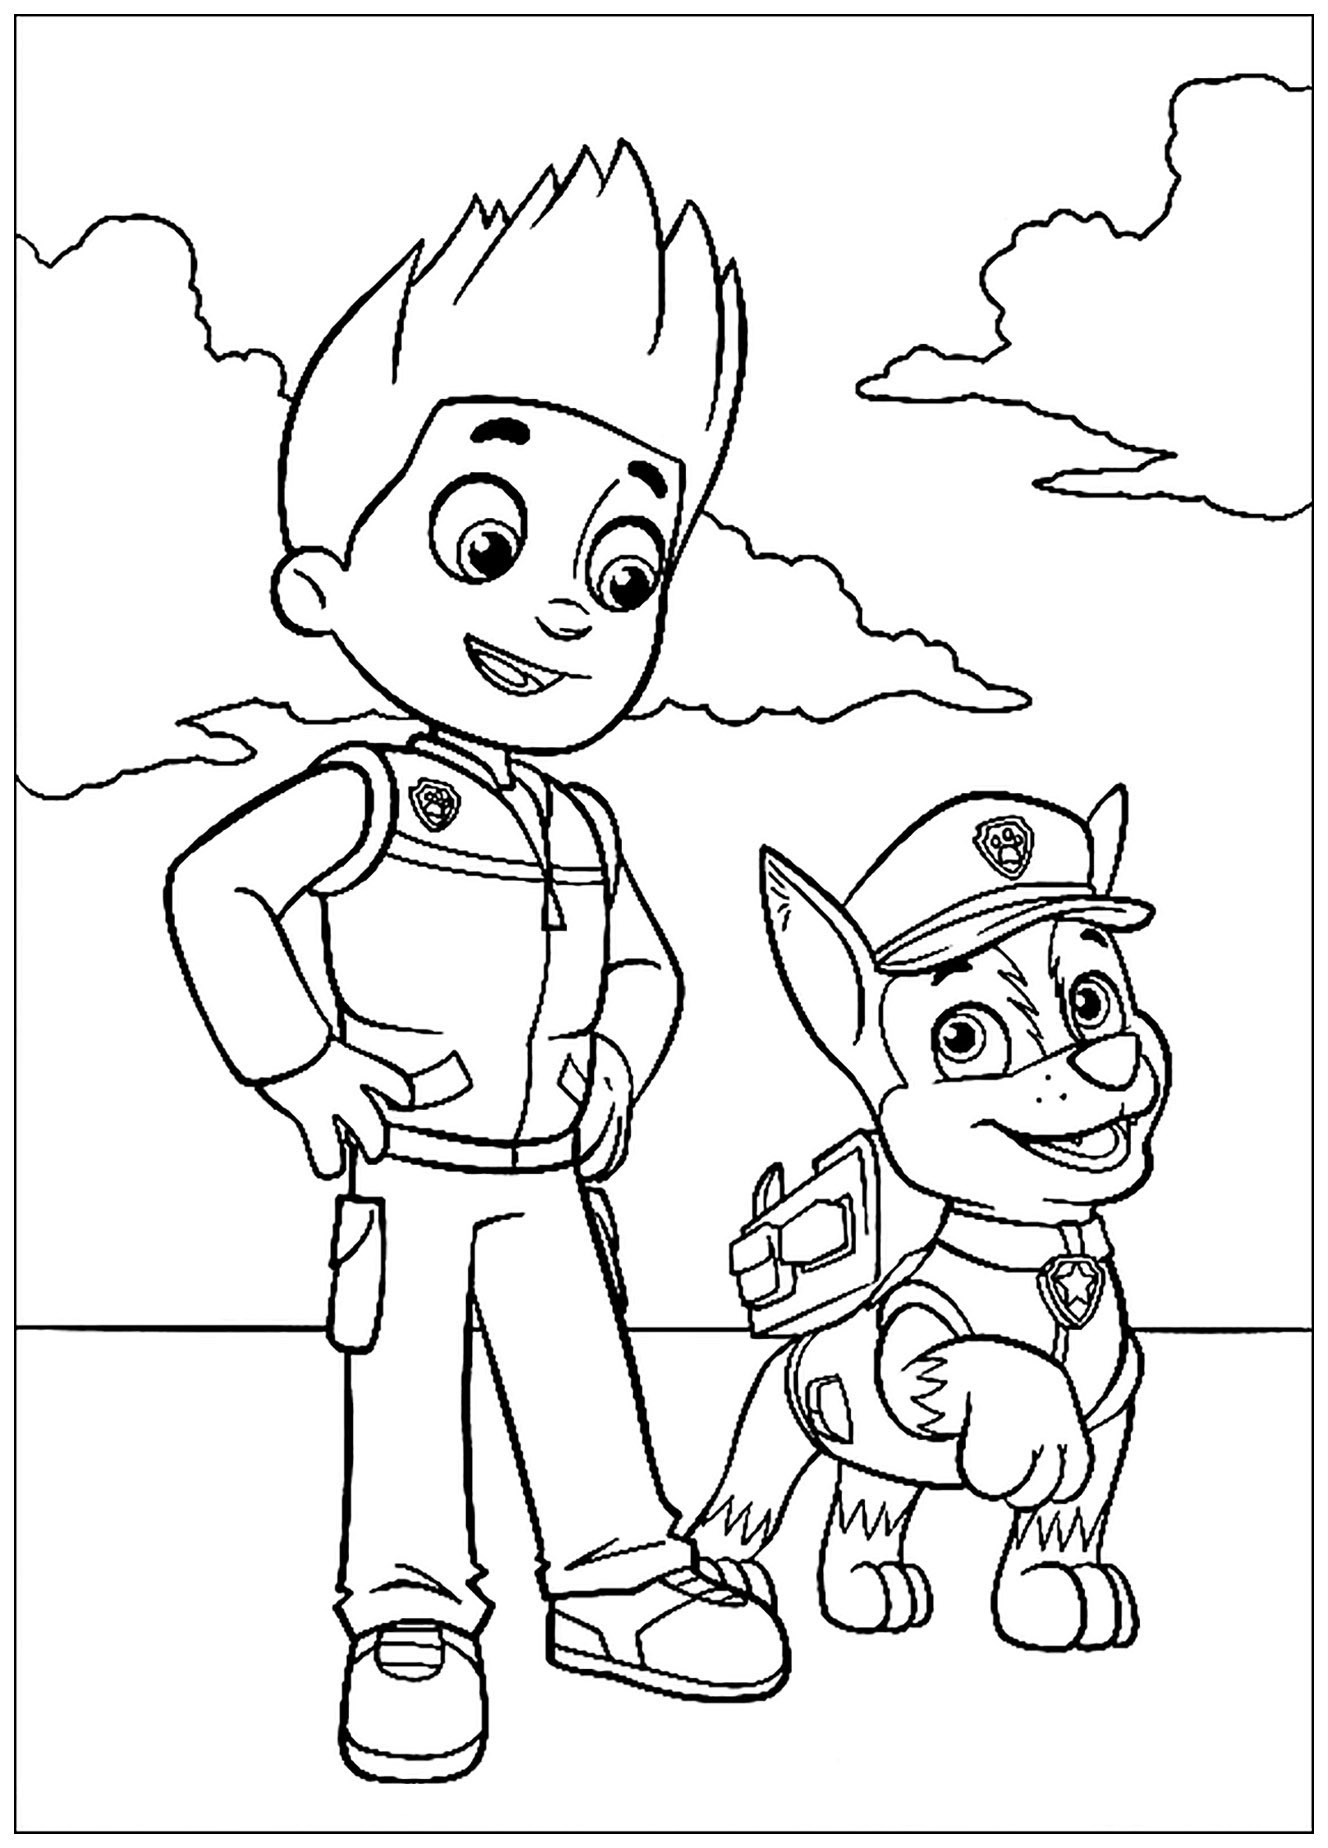 Patrol : The fine team : Ryder and Chase - Paw Patrol Kids Coloring Pages